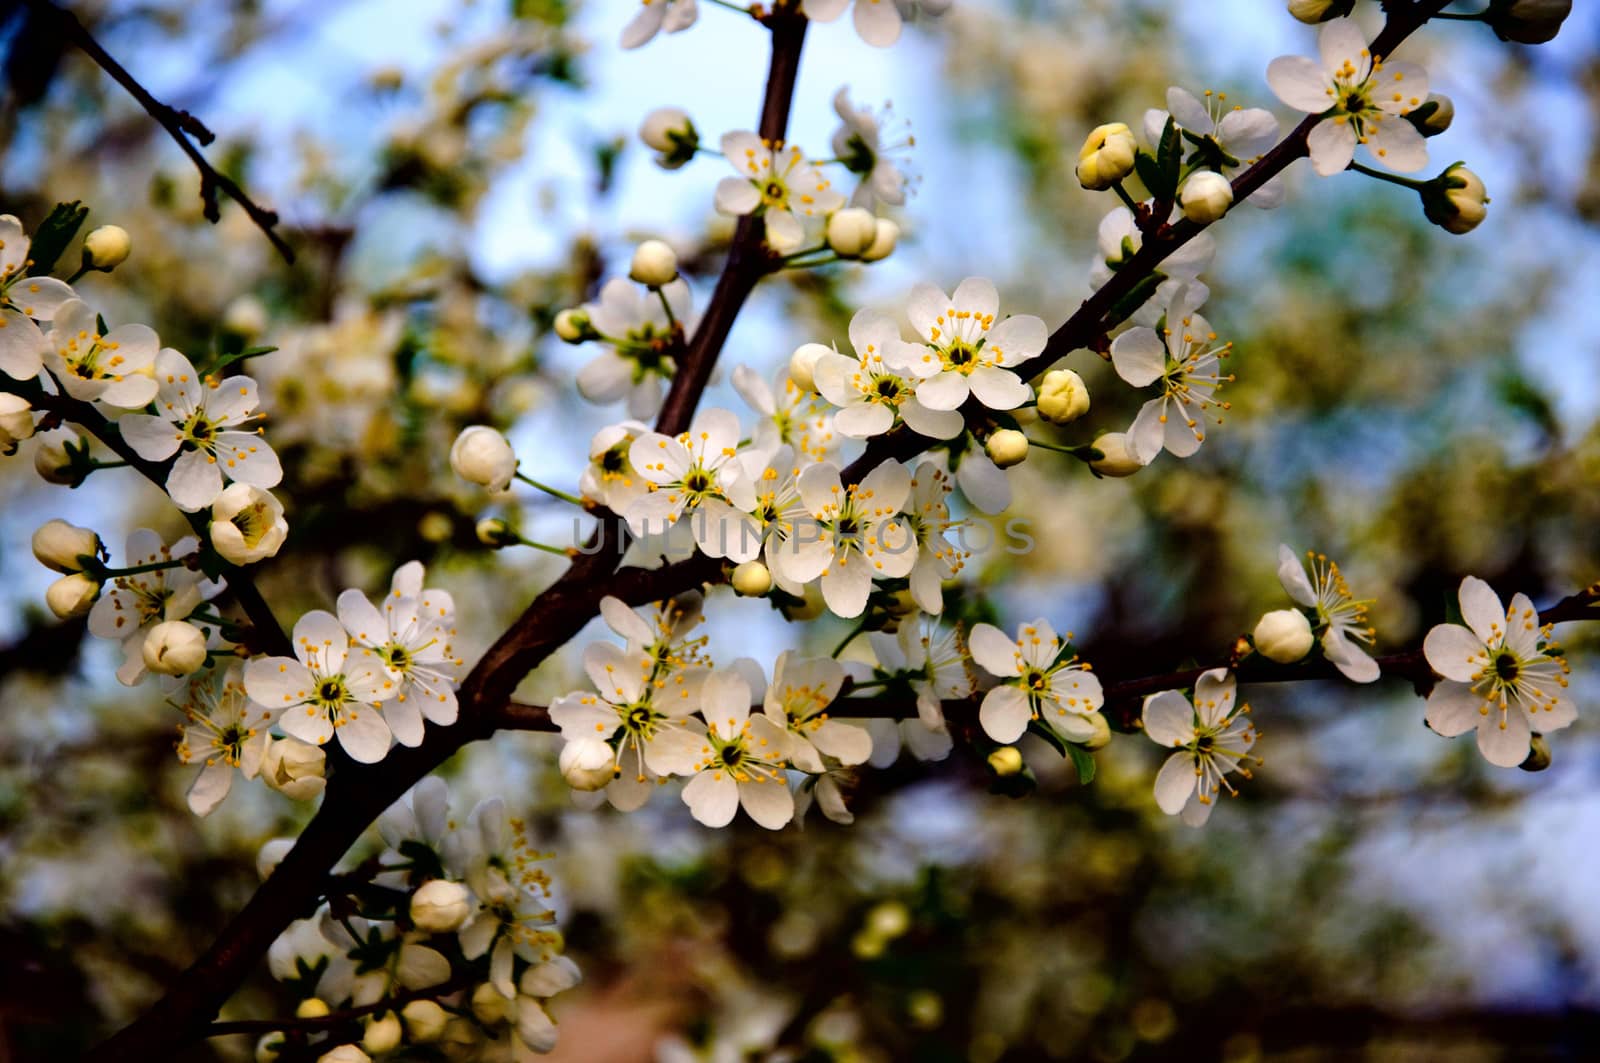 Blossoming apple tree with white flowers on blue sky background  by Eagle2308